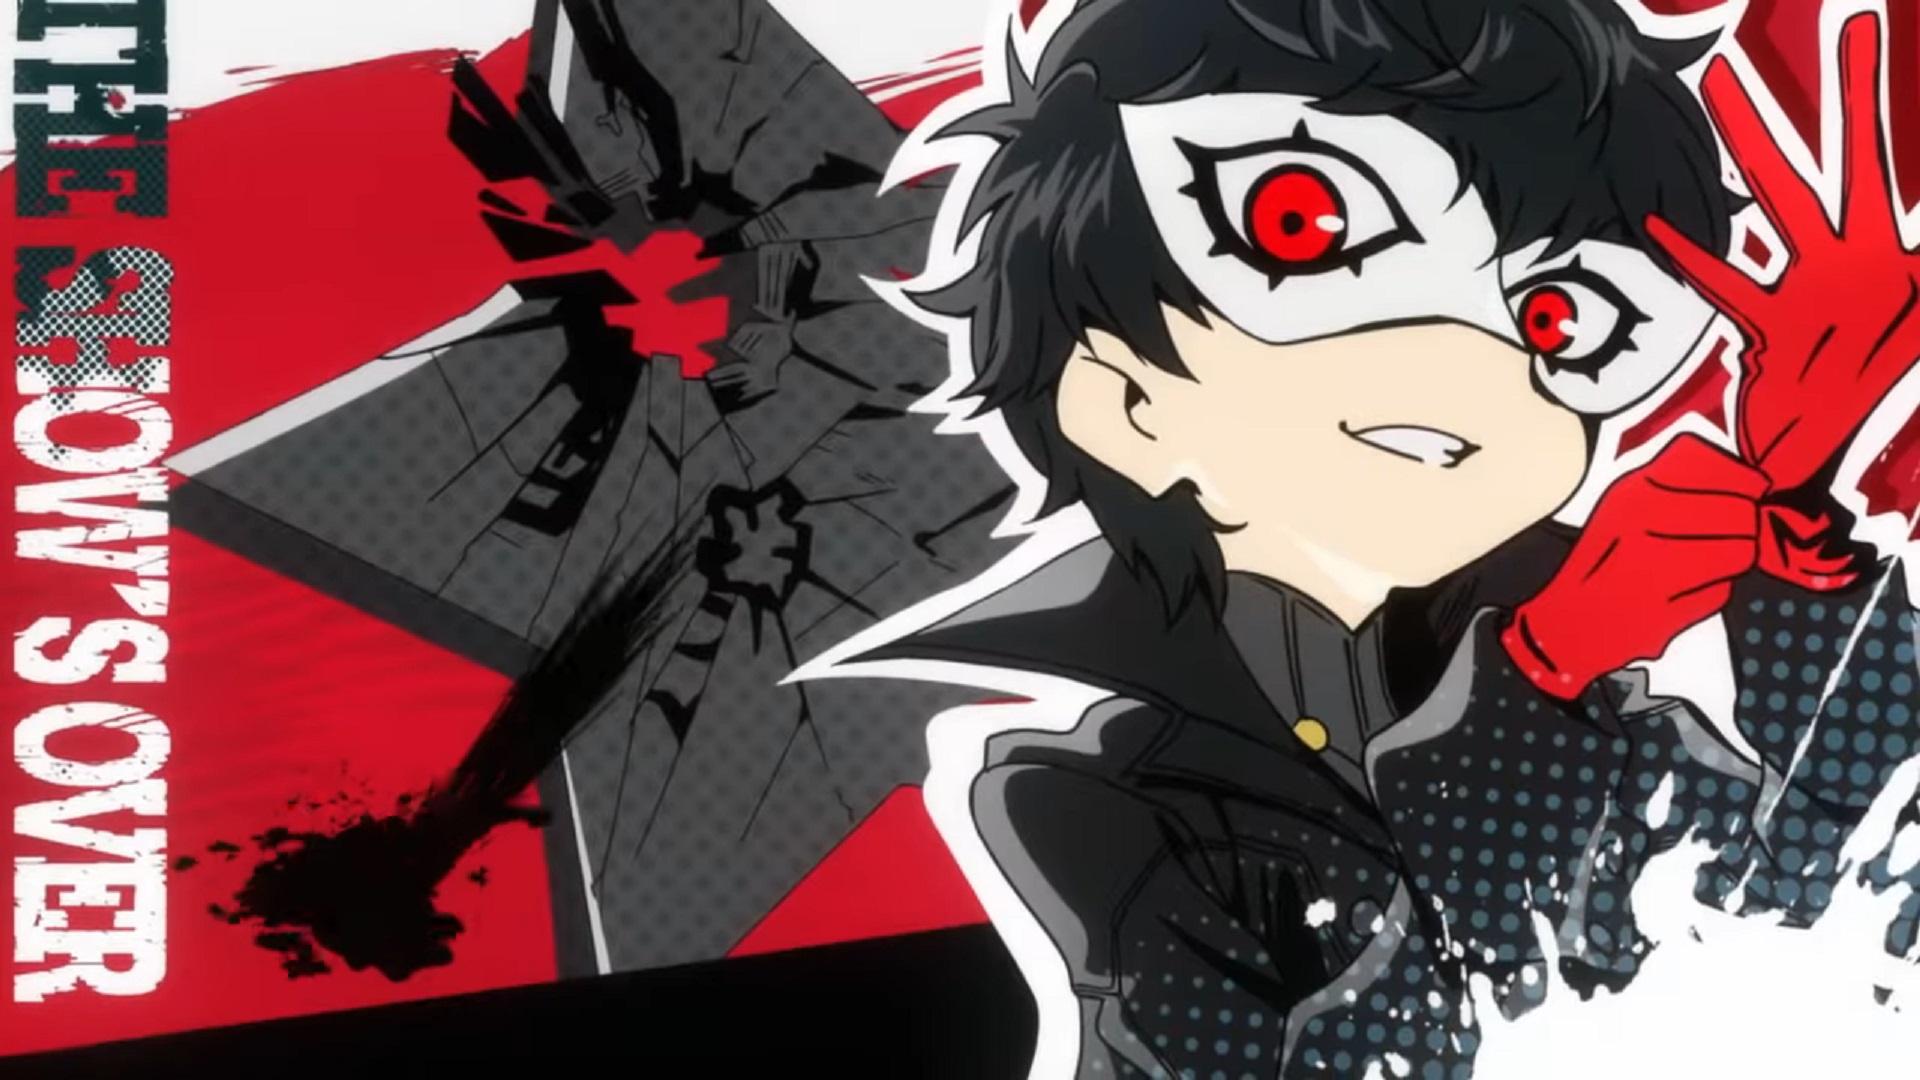 Persona Q2: New Cinema Labyrinth Finds Release Date